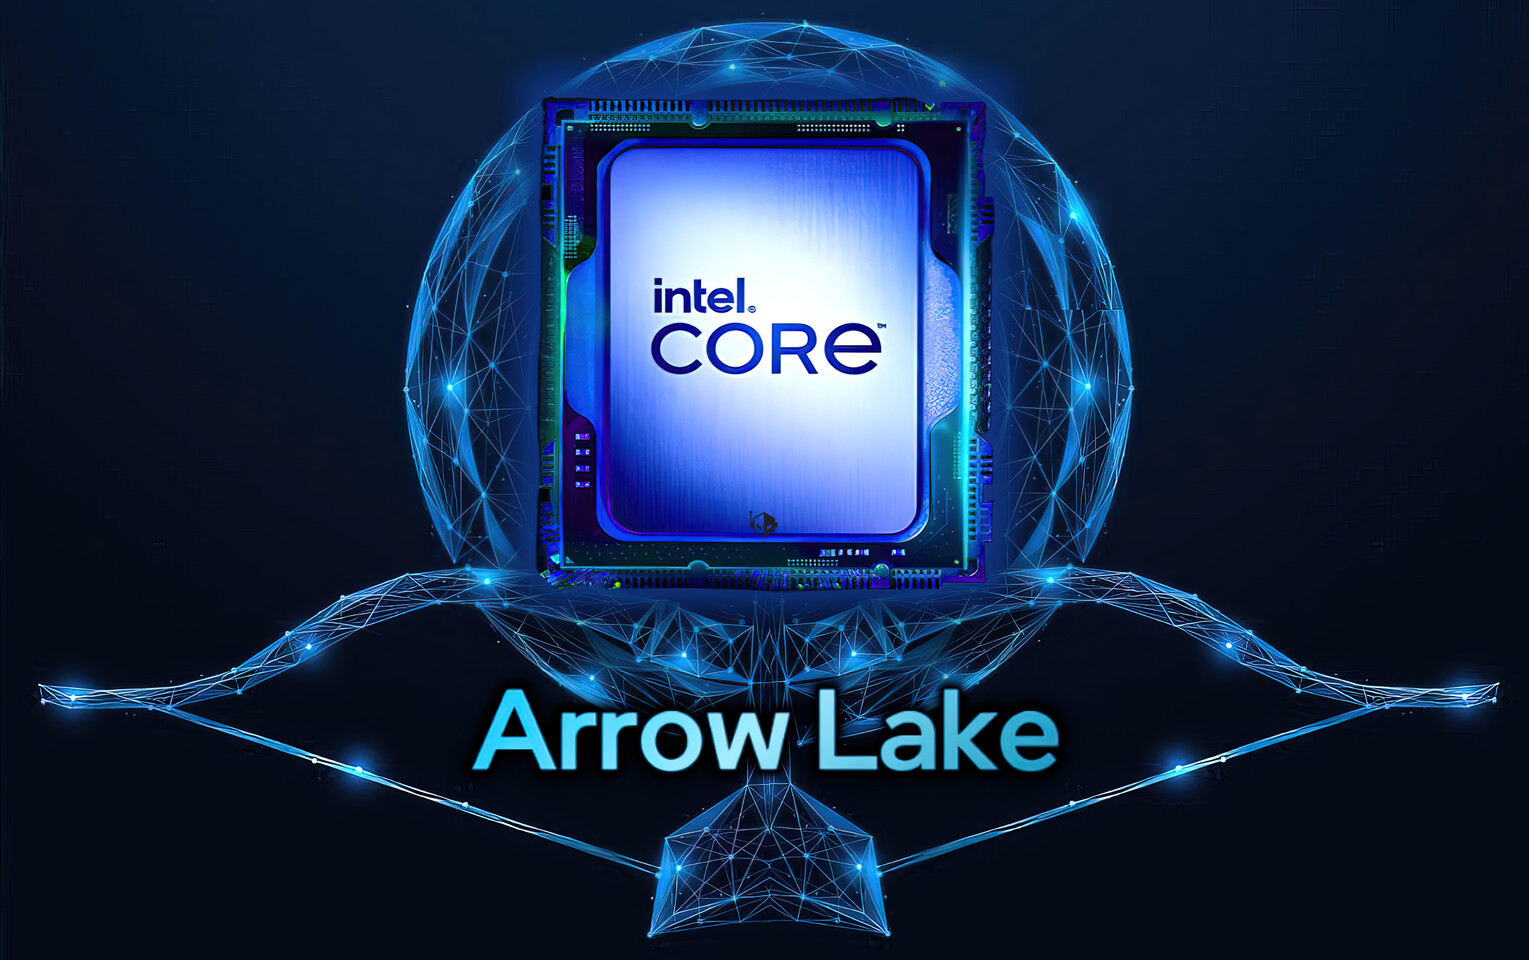 Intel's 15th generation processors (Arrow Lake-S) will likely abandon Hyper-Threading technology in favor of Profitable Units